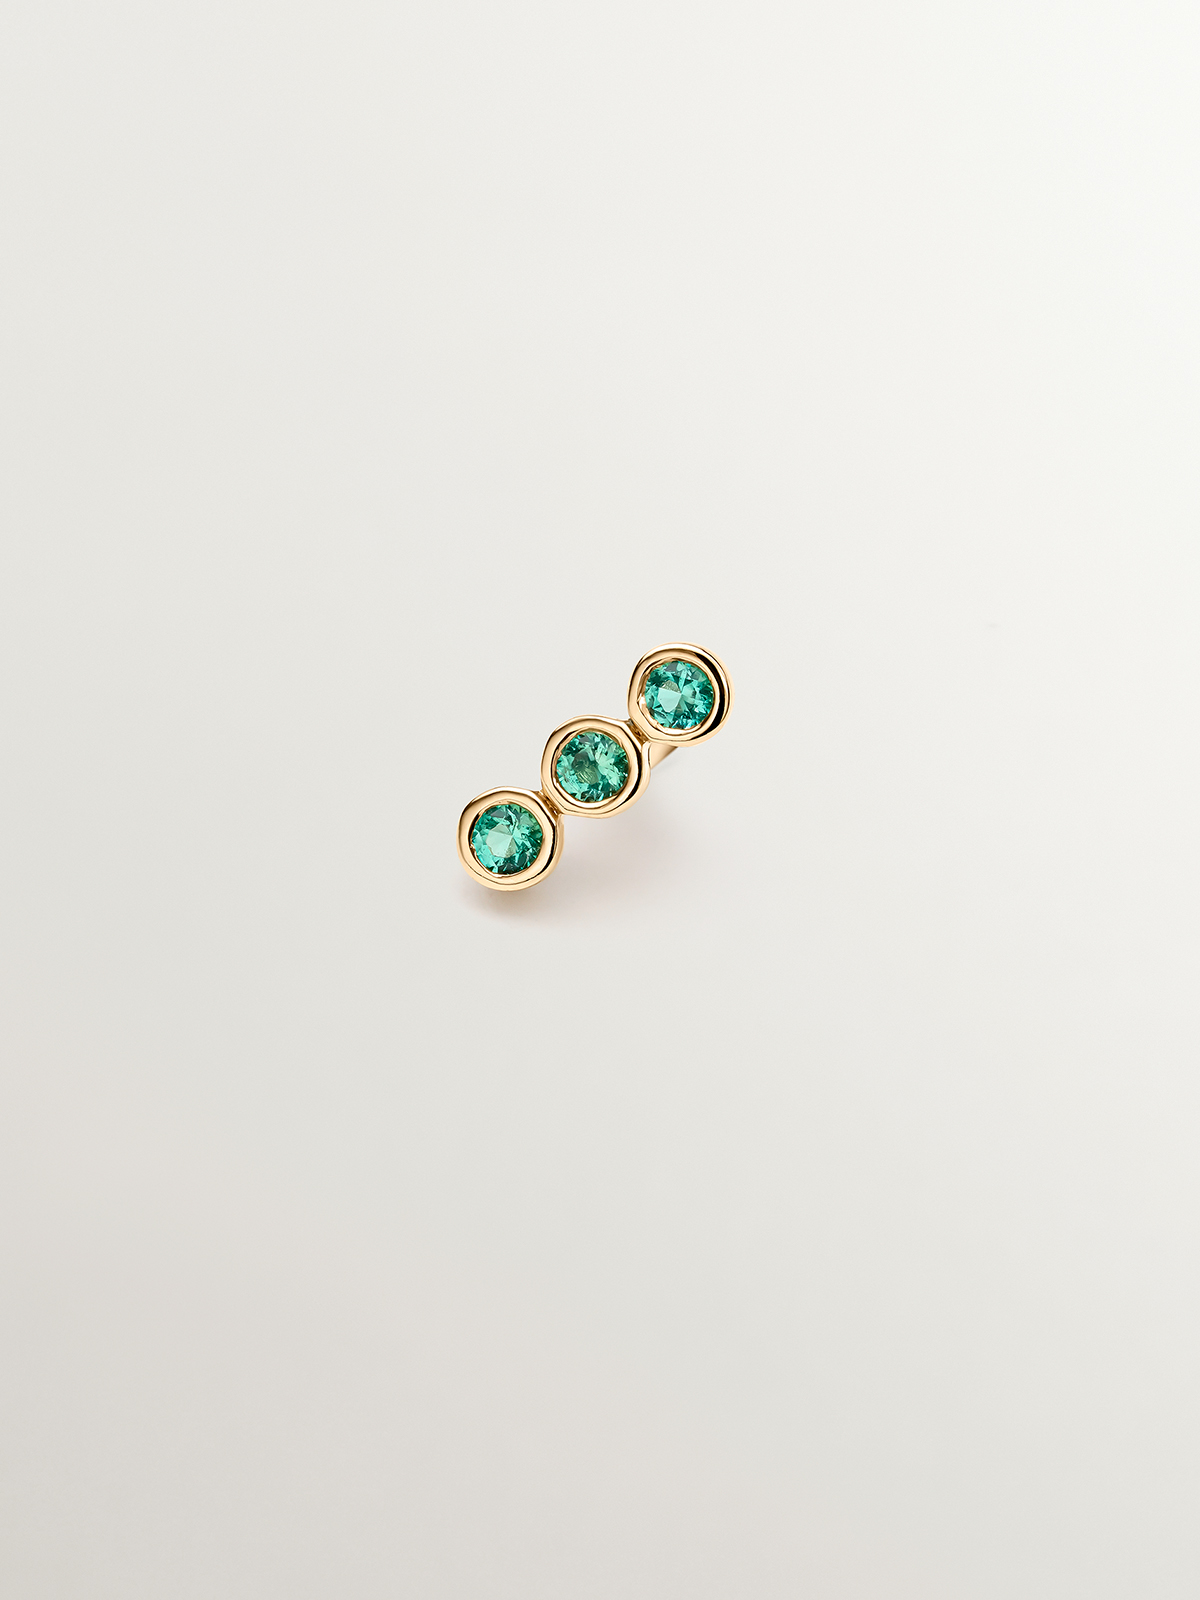 Individual 9K yellow gold earring with emeralds.